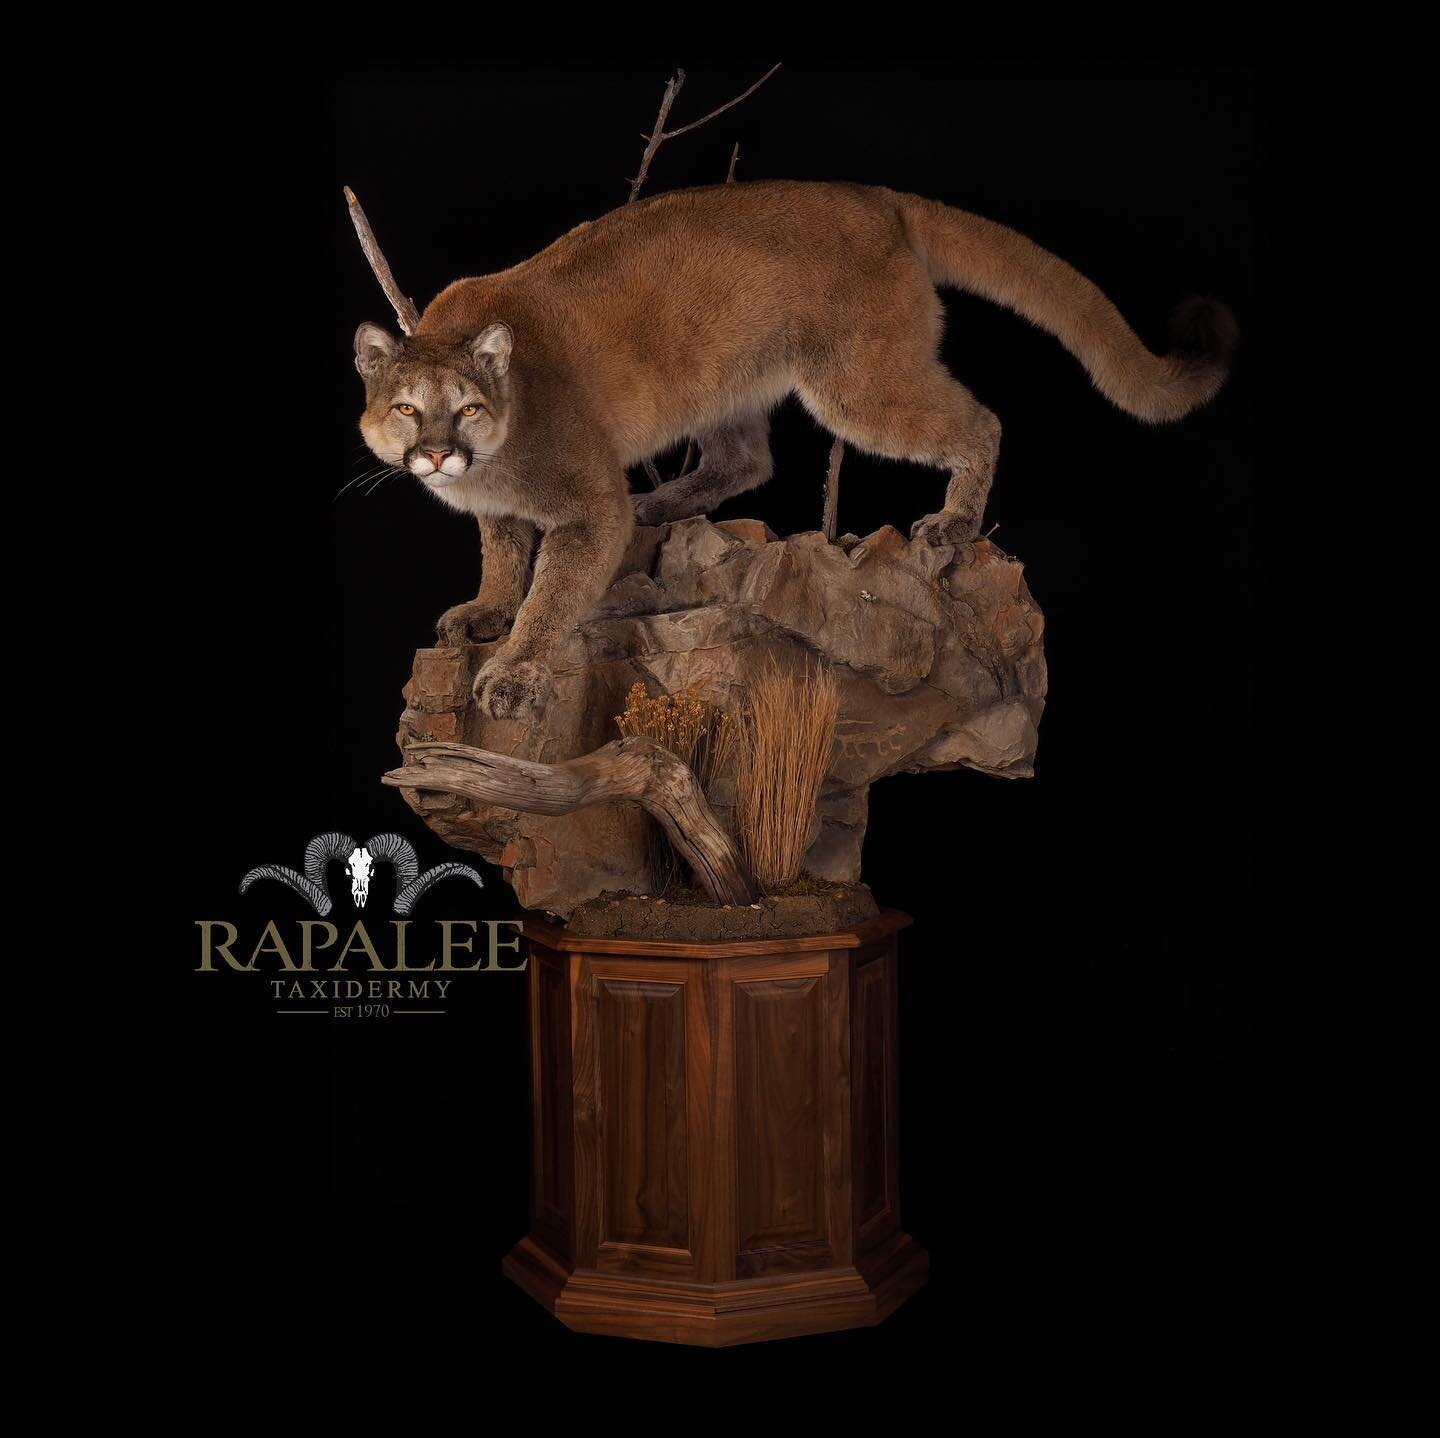 Friday Fun Fact - Did you know that the cougar holds the Guinness record for the animal with the greatest number of names? They have over 40 names in the English language alone. #rapaleetaxidermy #worldclasstaxidermy #virginiataxidermy #virginiataxid